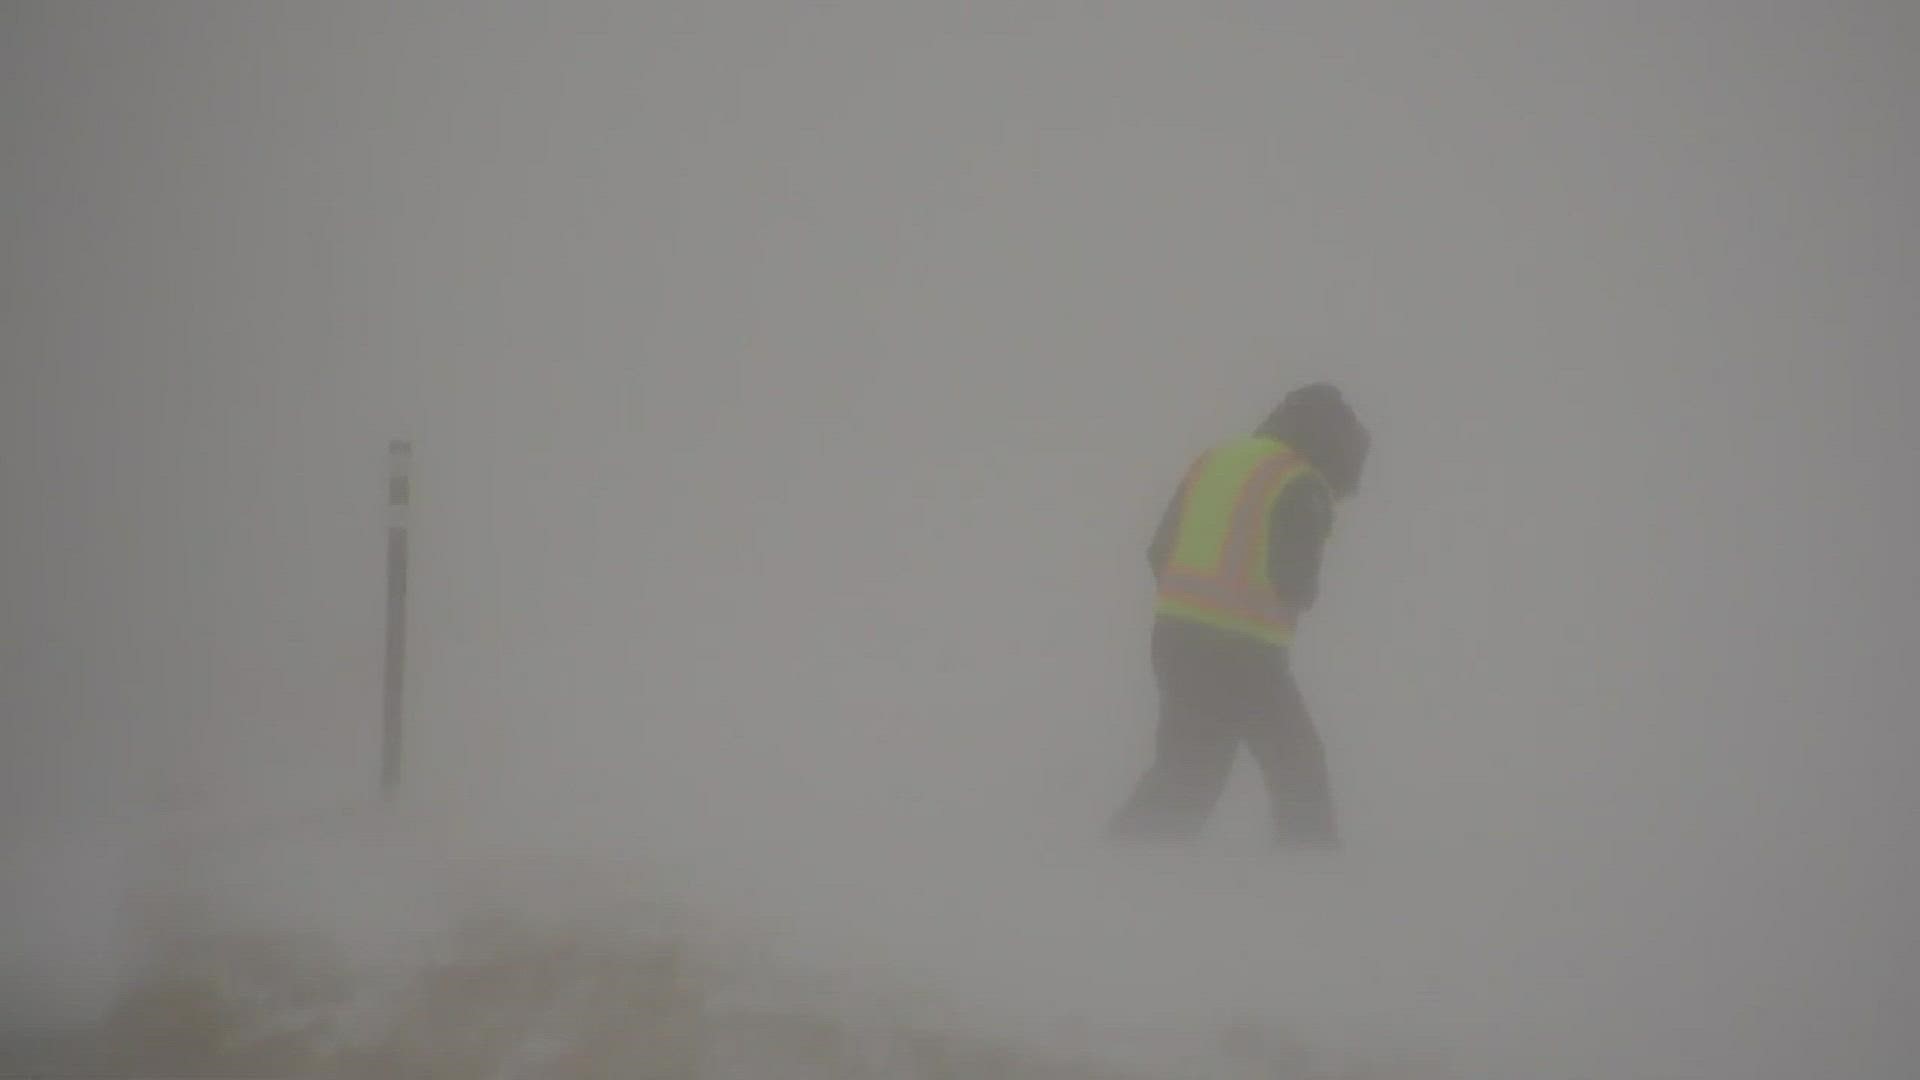 While conditions in Denver were pretty mild, a blizzard slammed large swaths of the plains south and east of the city Monday night and Tuesday morning. And Meteorologist Cory Reppenhagen was in the worst of it.